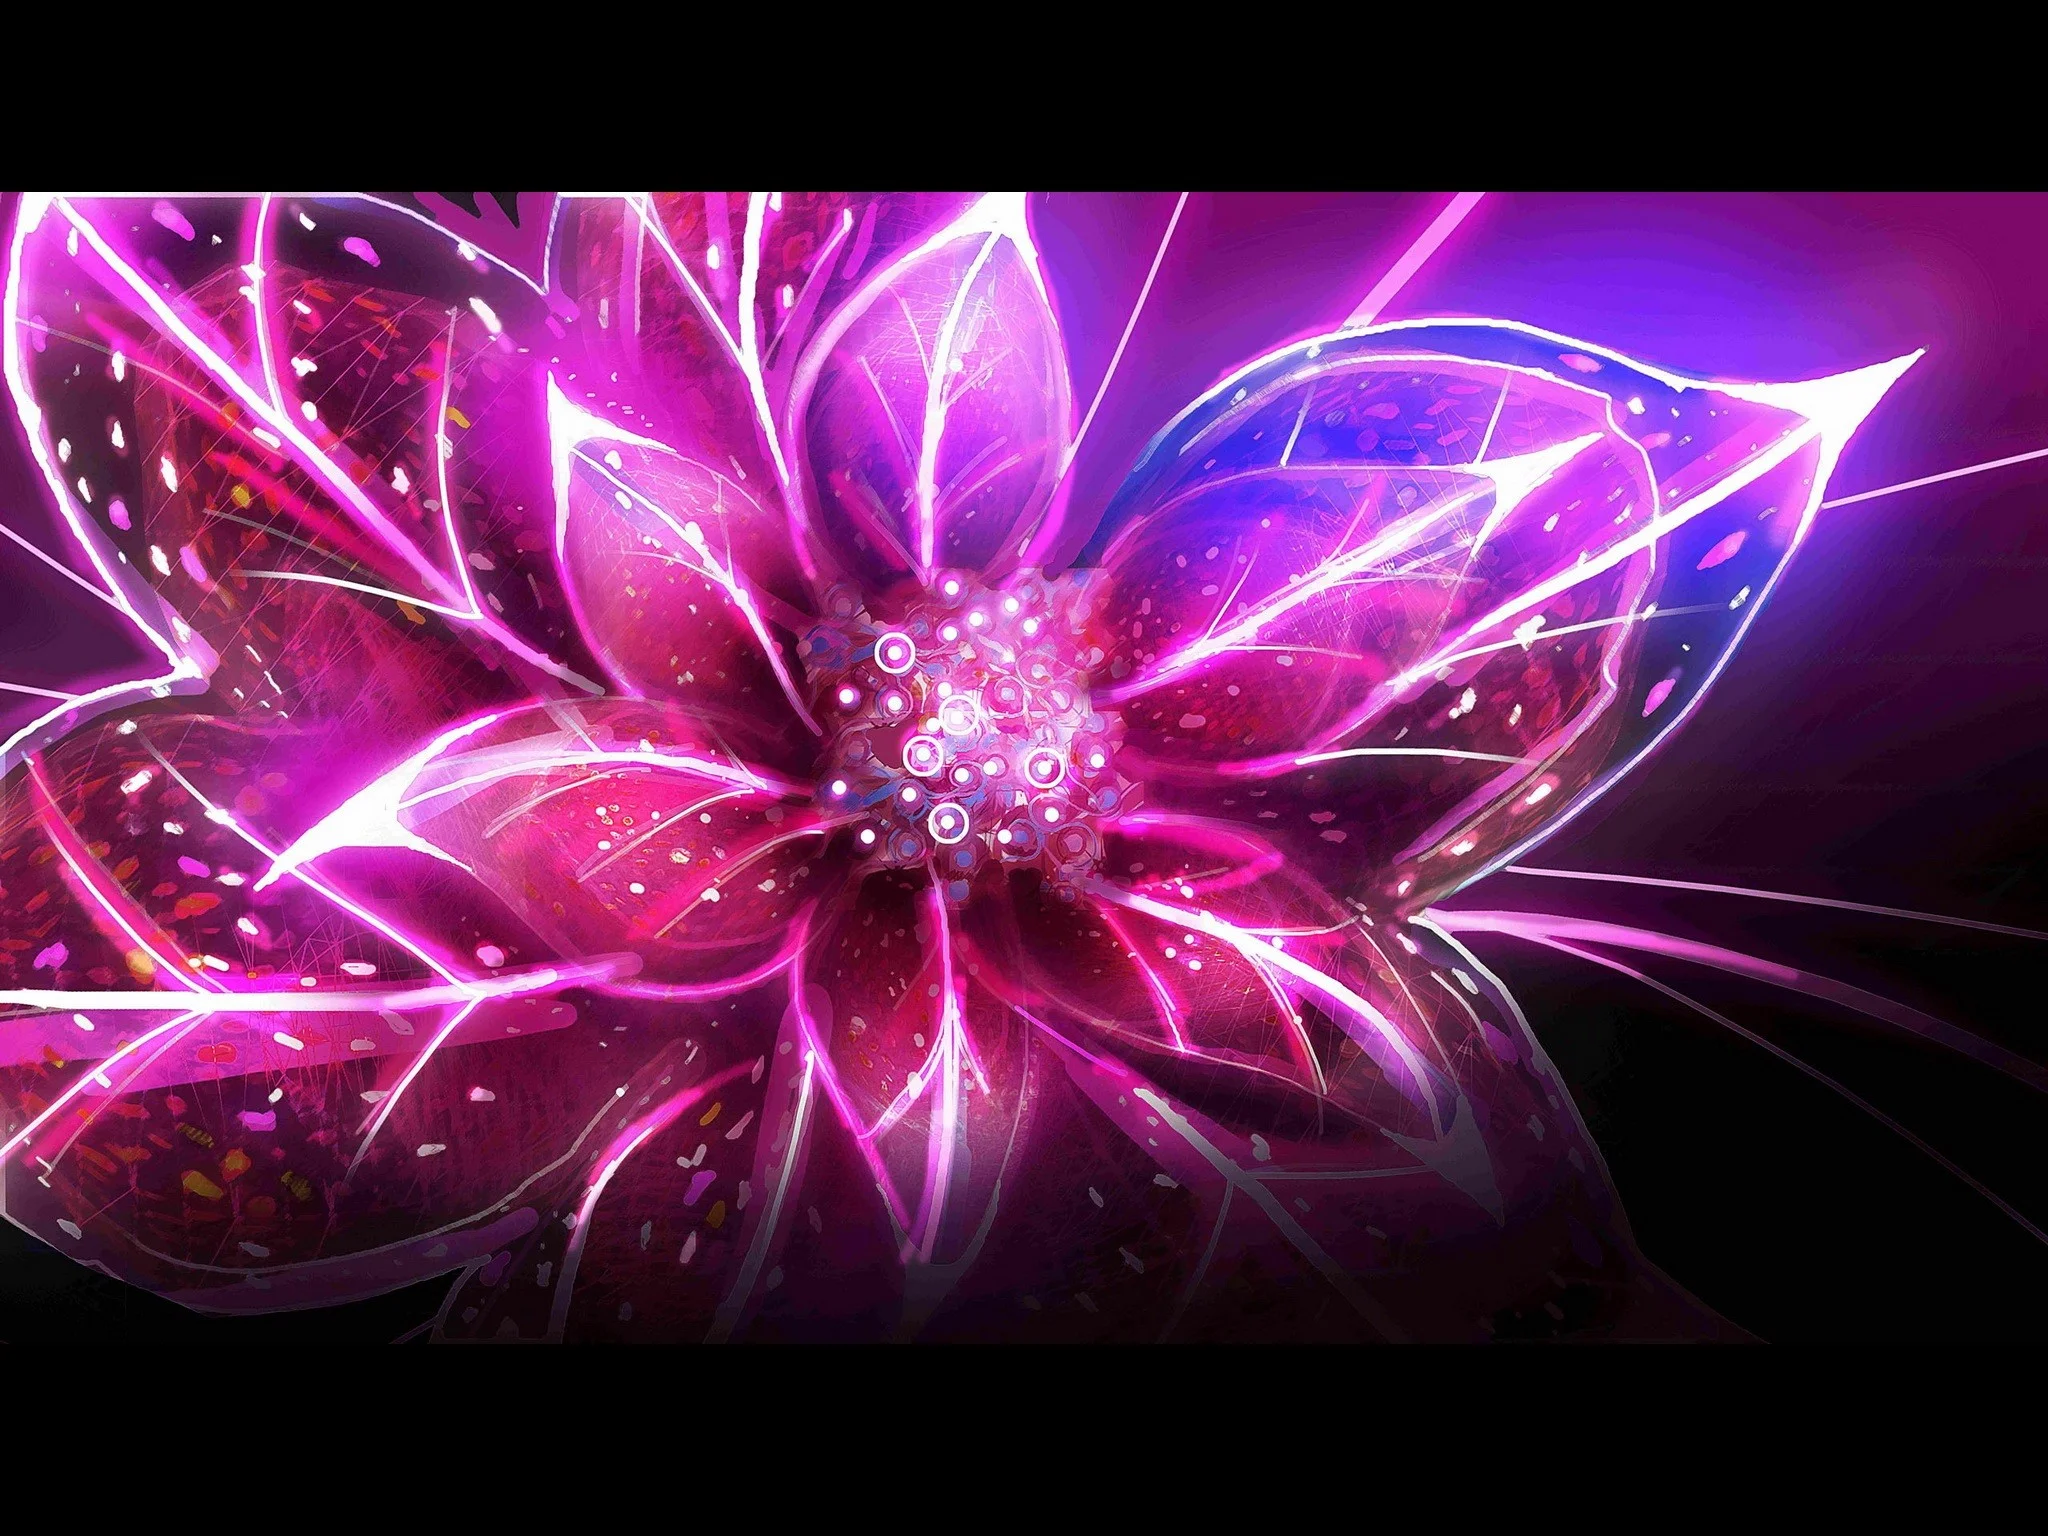 Abstract Fantasy Art Artwork Child Of Eden Colorful Flower Pink Purple Blue  HD Wallpaper Res: